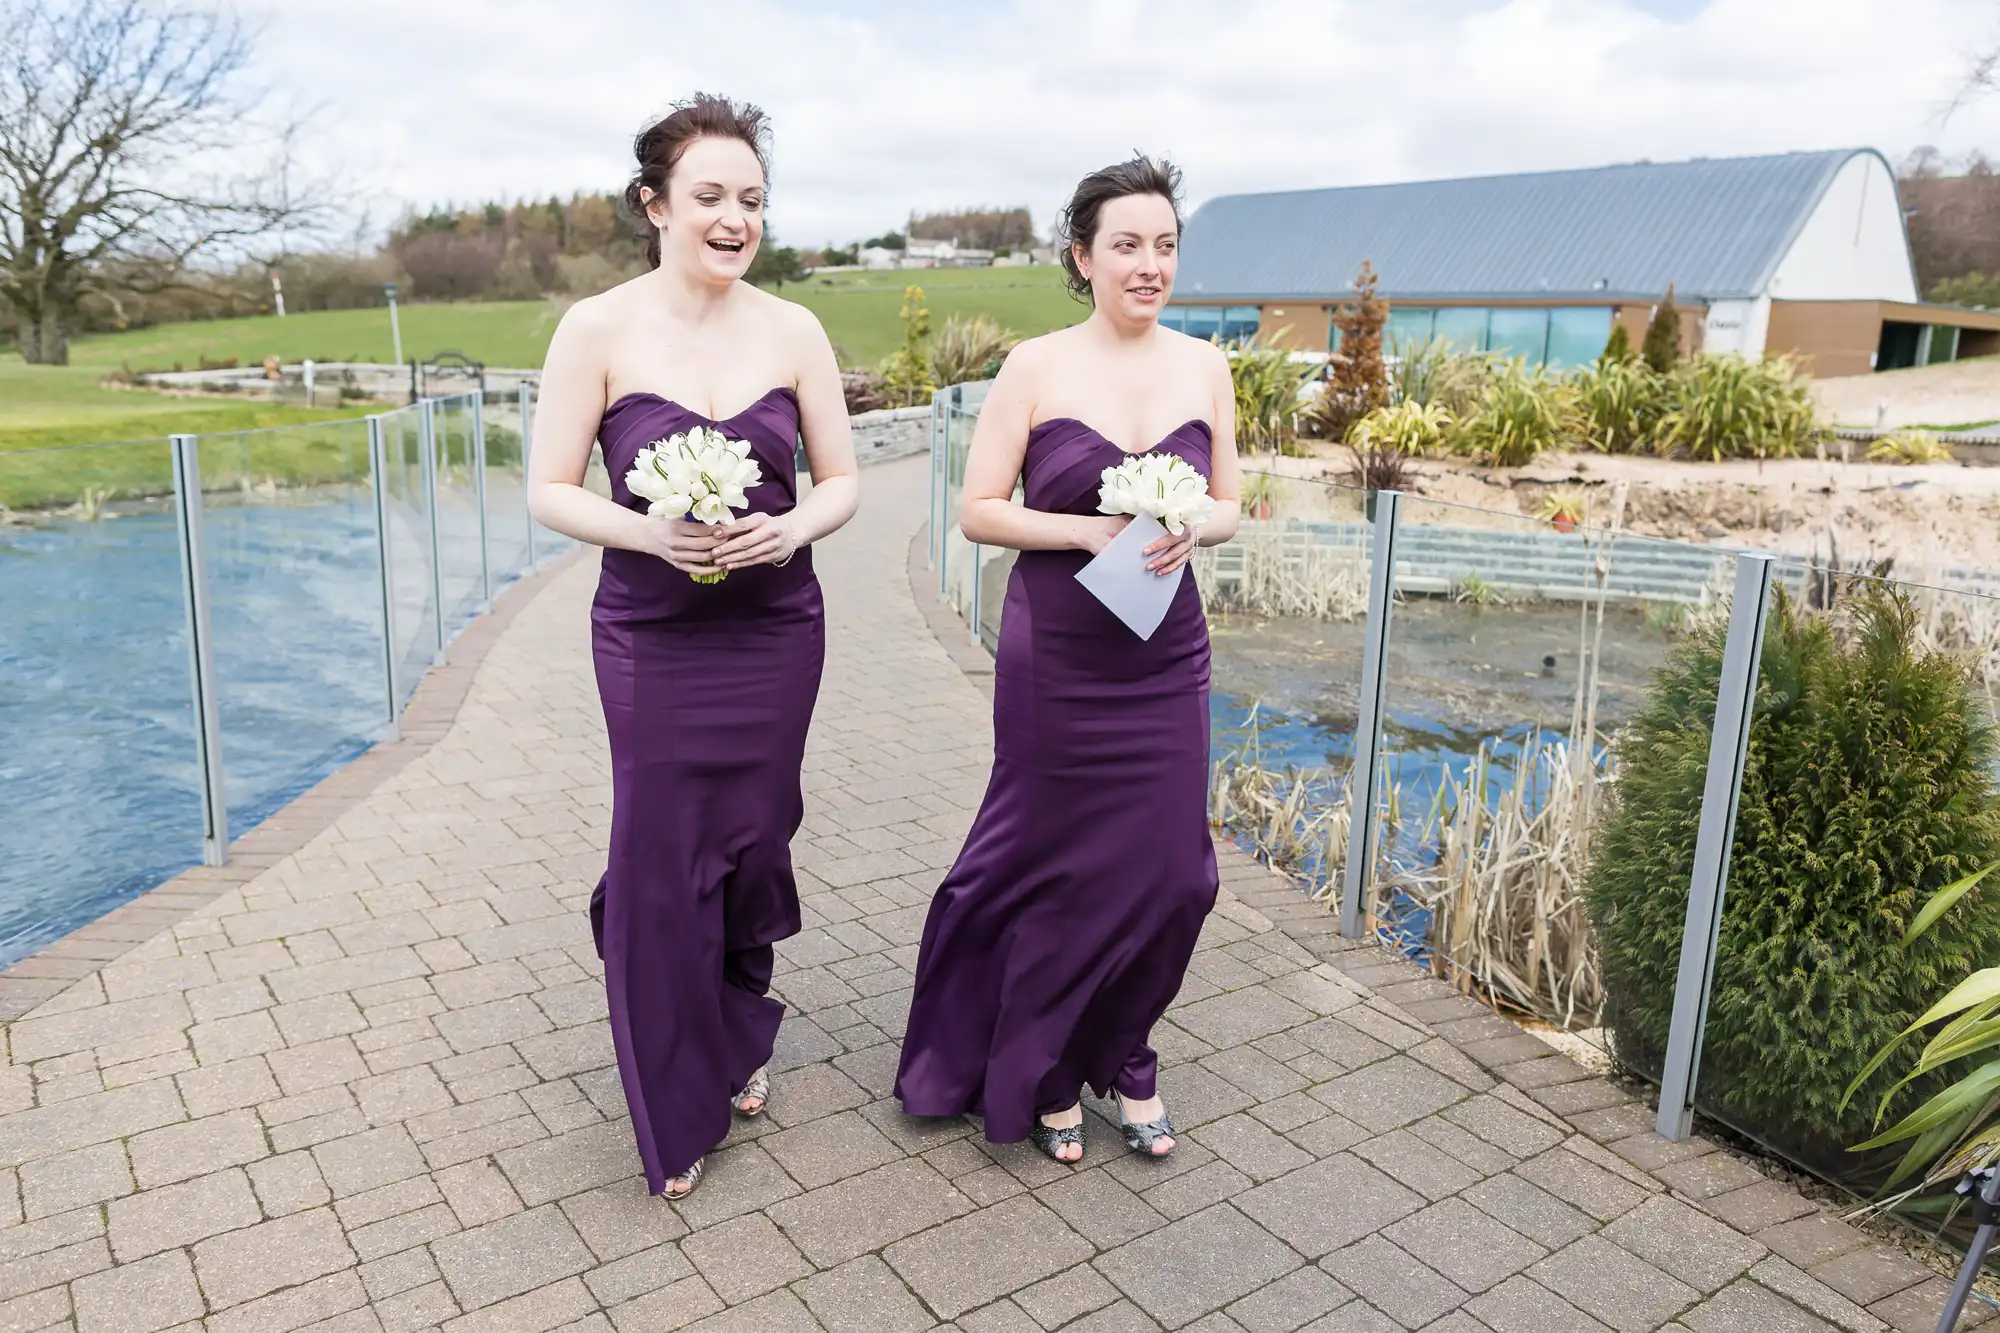 Two women in purple dresses holding bouquets walk along a paved path near a water feature, with a building in the background.